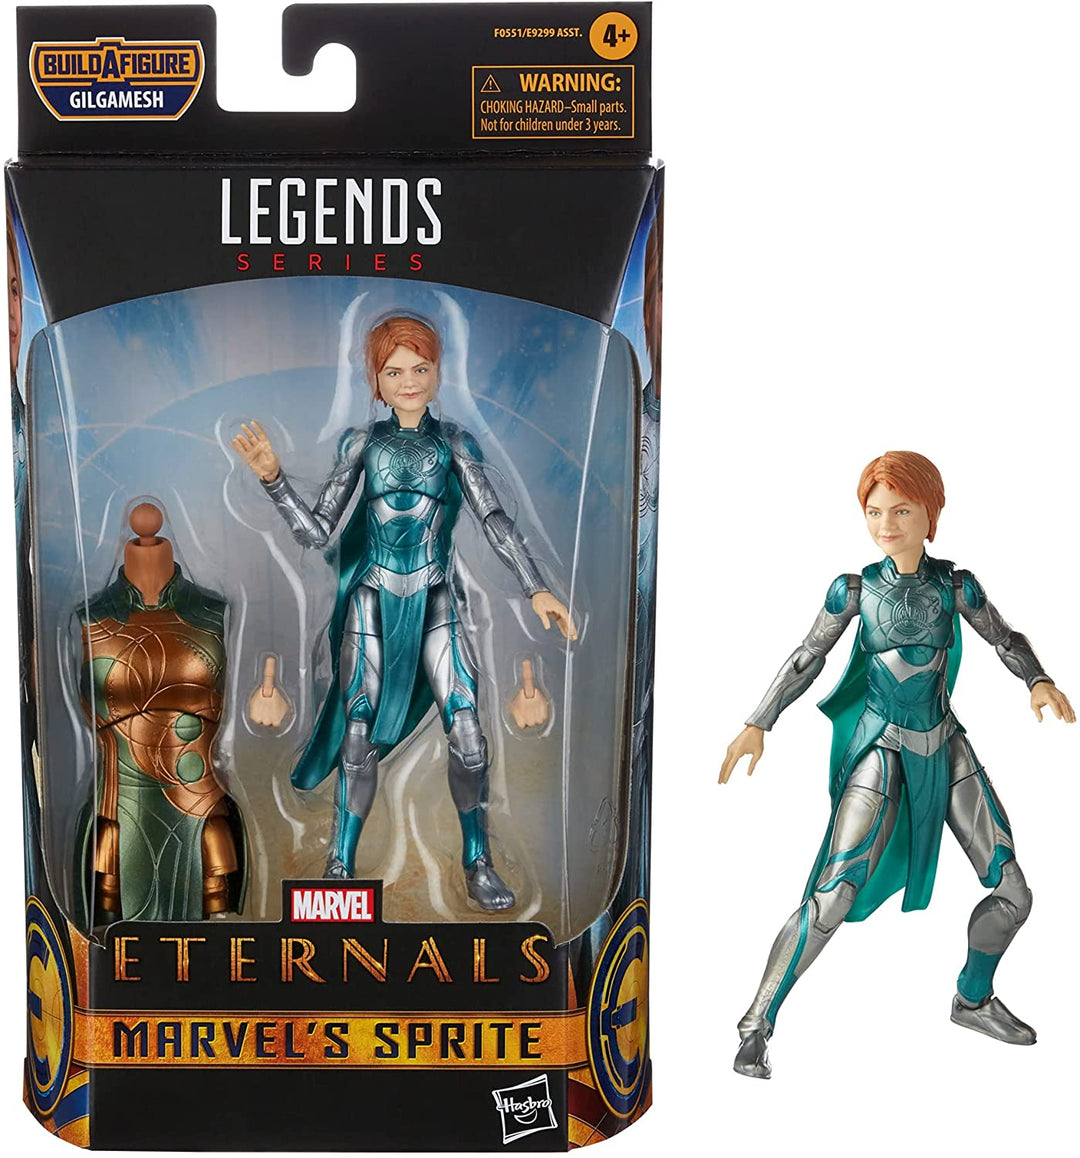 The Eternals Hasbro Marvel Legends Series Marvel’s Sprite 6-Inch Action Figure Toy, Includes 2 Accessories, Ages 4 and Up